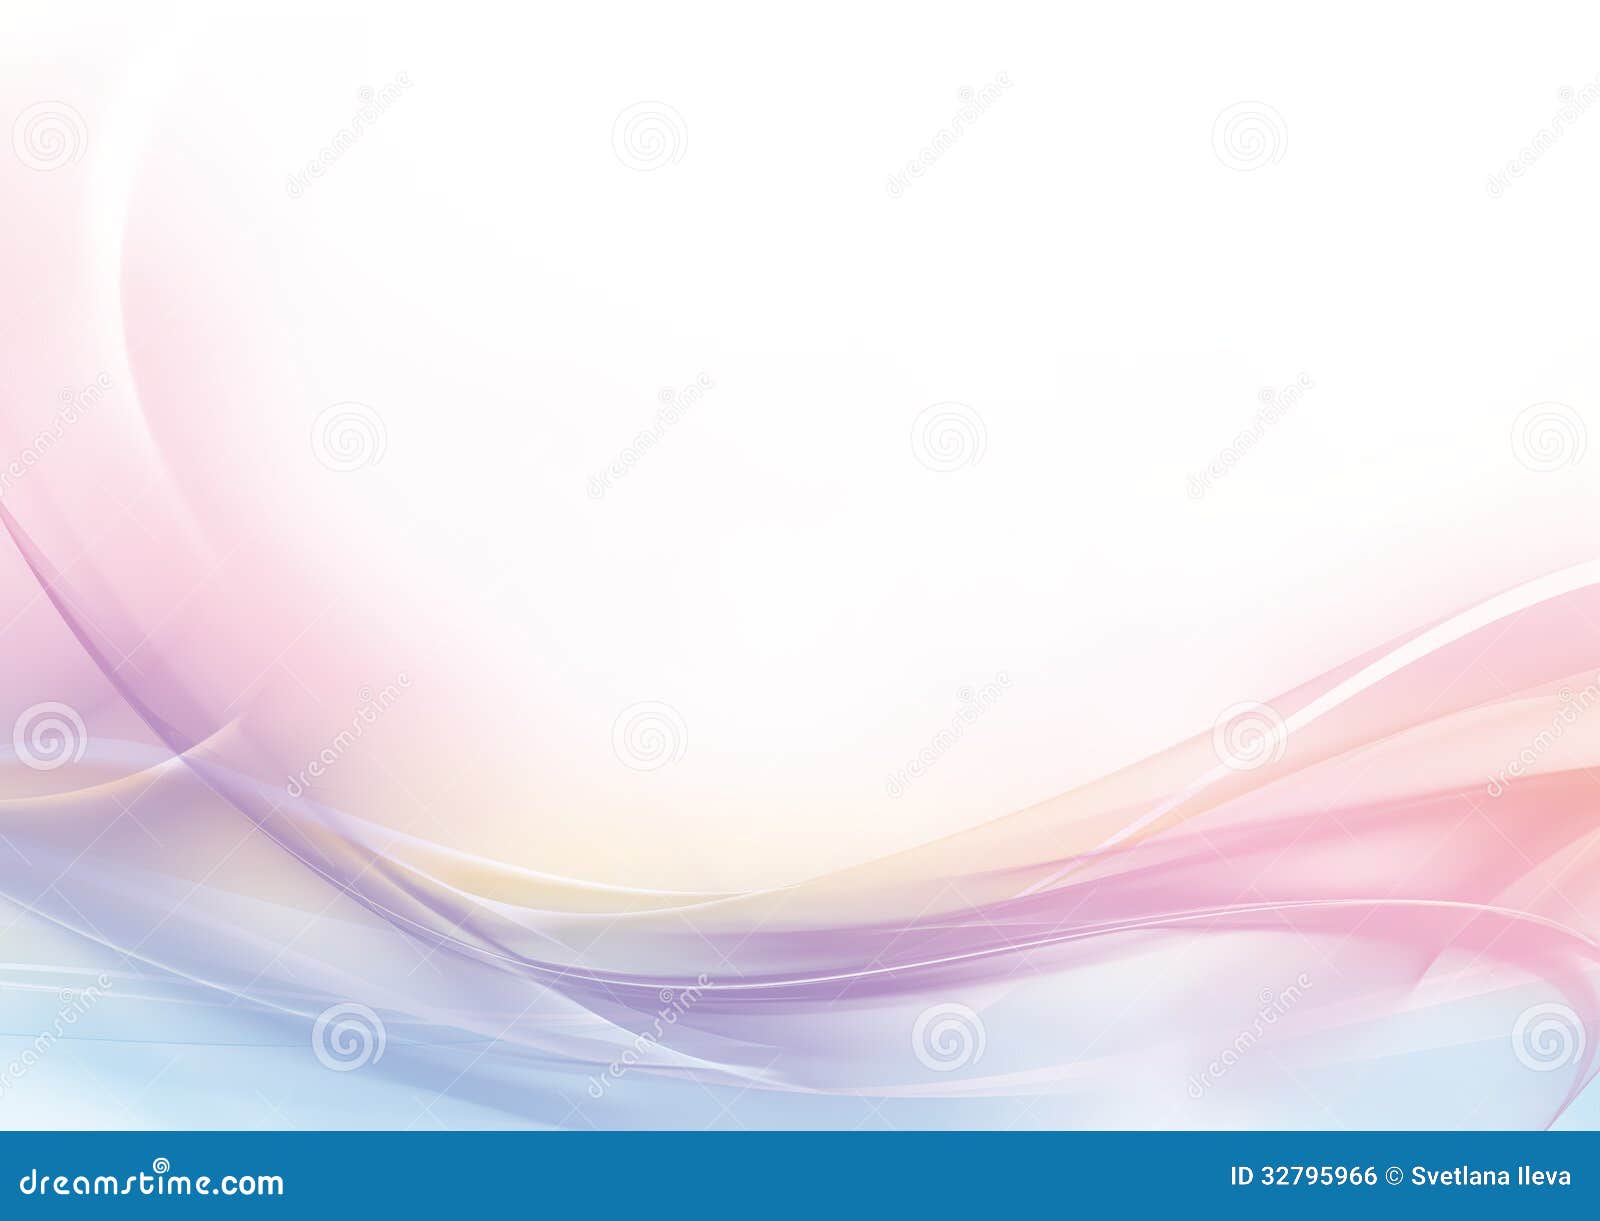 abstract pastel pink and white background